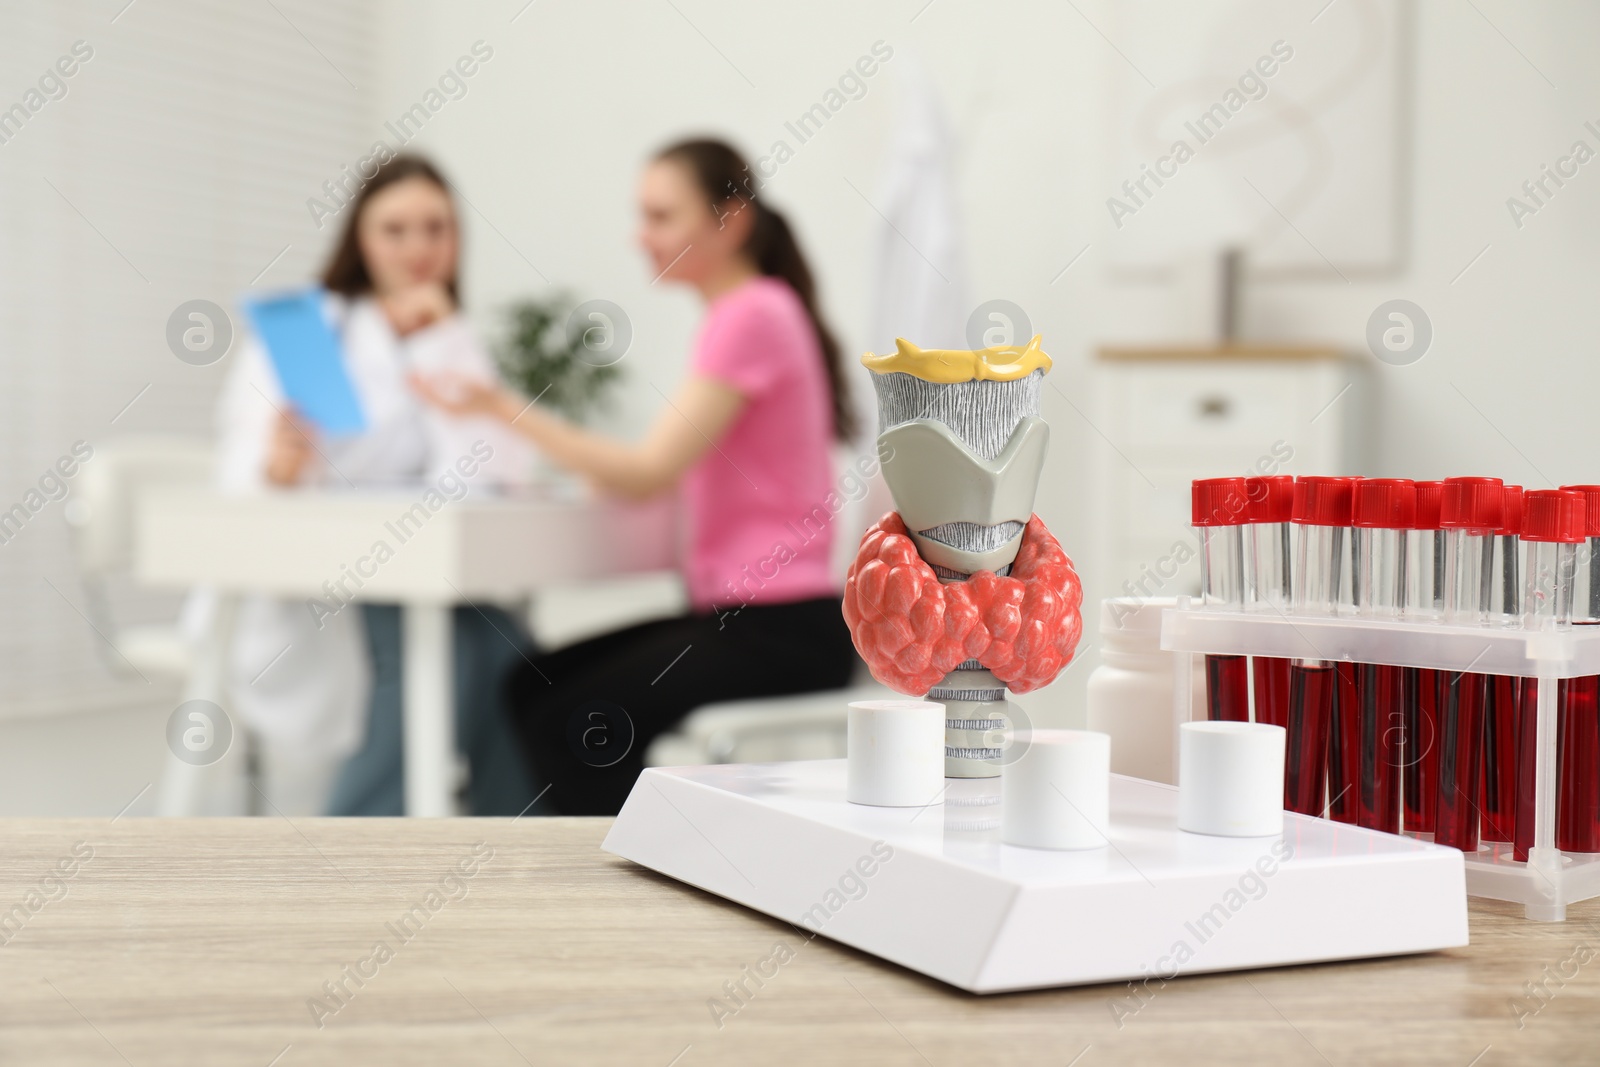 Photo of Endocrinologist examining patient at clinic, focus on model of thyroid gland and blood samples in test tubes